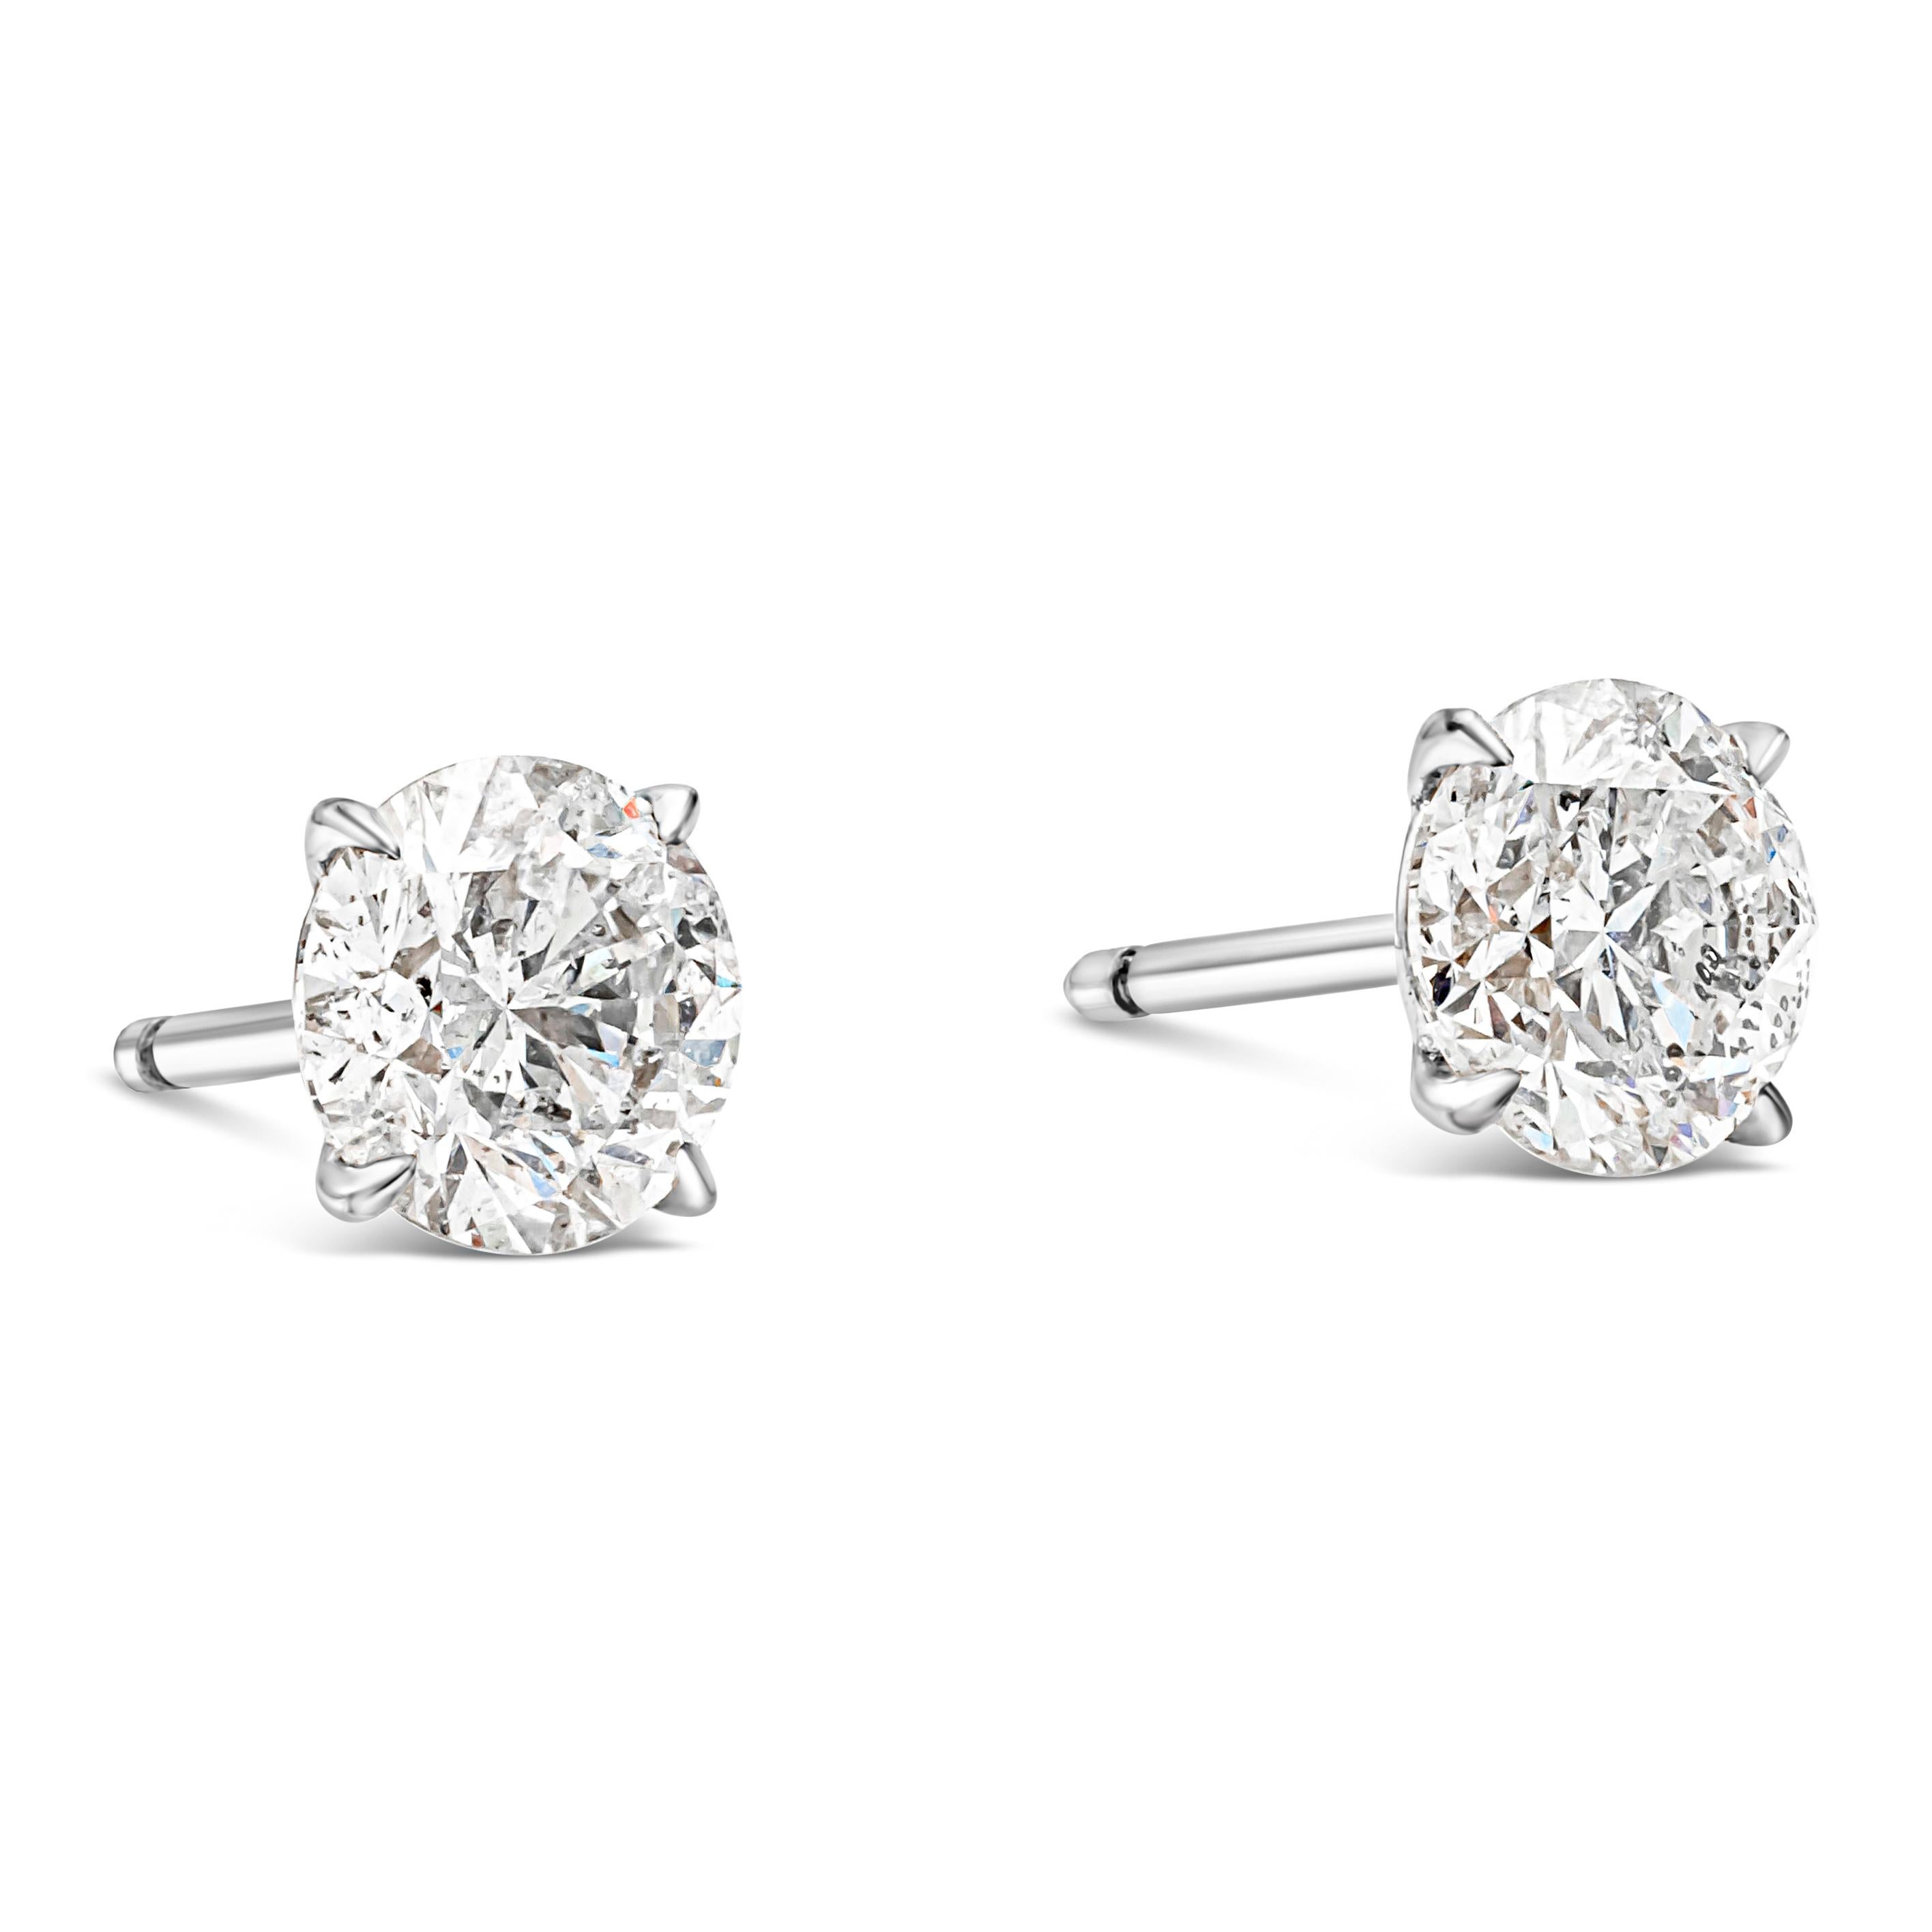 Classic pair of stud earrings showcasing two GIA Certified round brilliant diamonds, each weighing 1.29 carats and 1.21 carats, G-H Color and I2 in Clarity respectively.  Mounted in a timeless four-prong martini setting. Made with 18K White